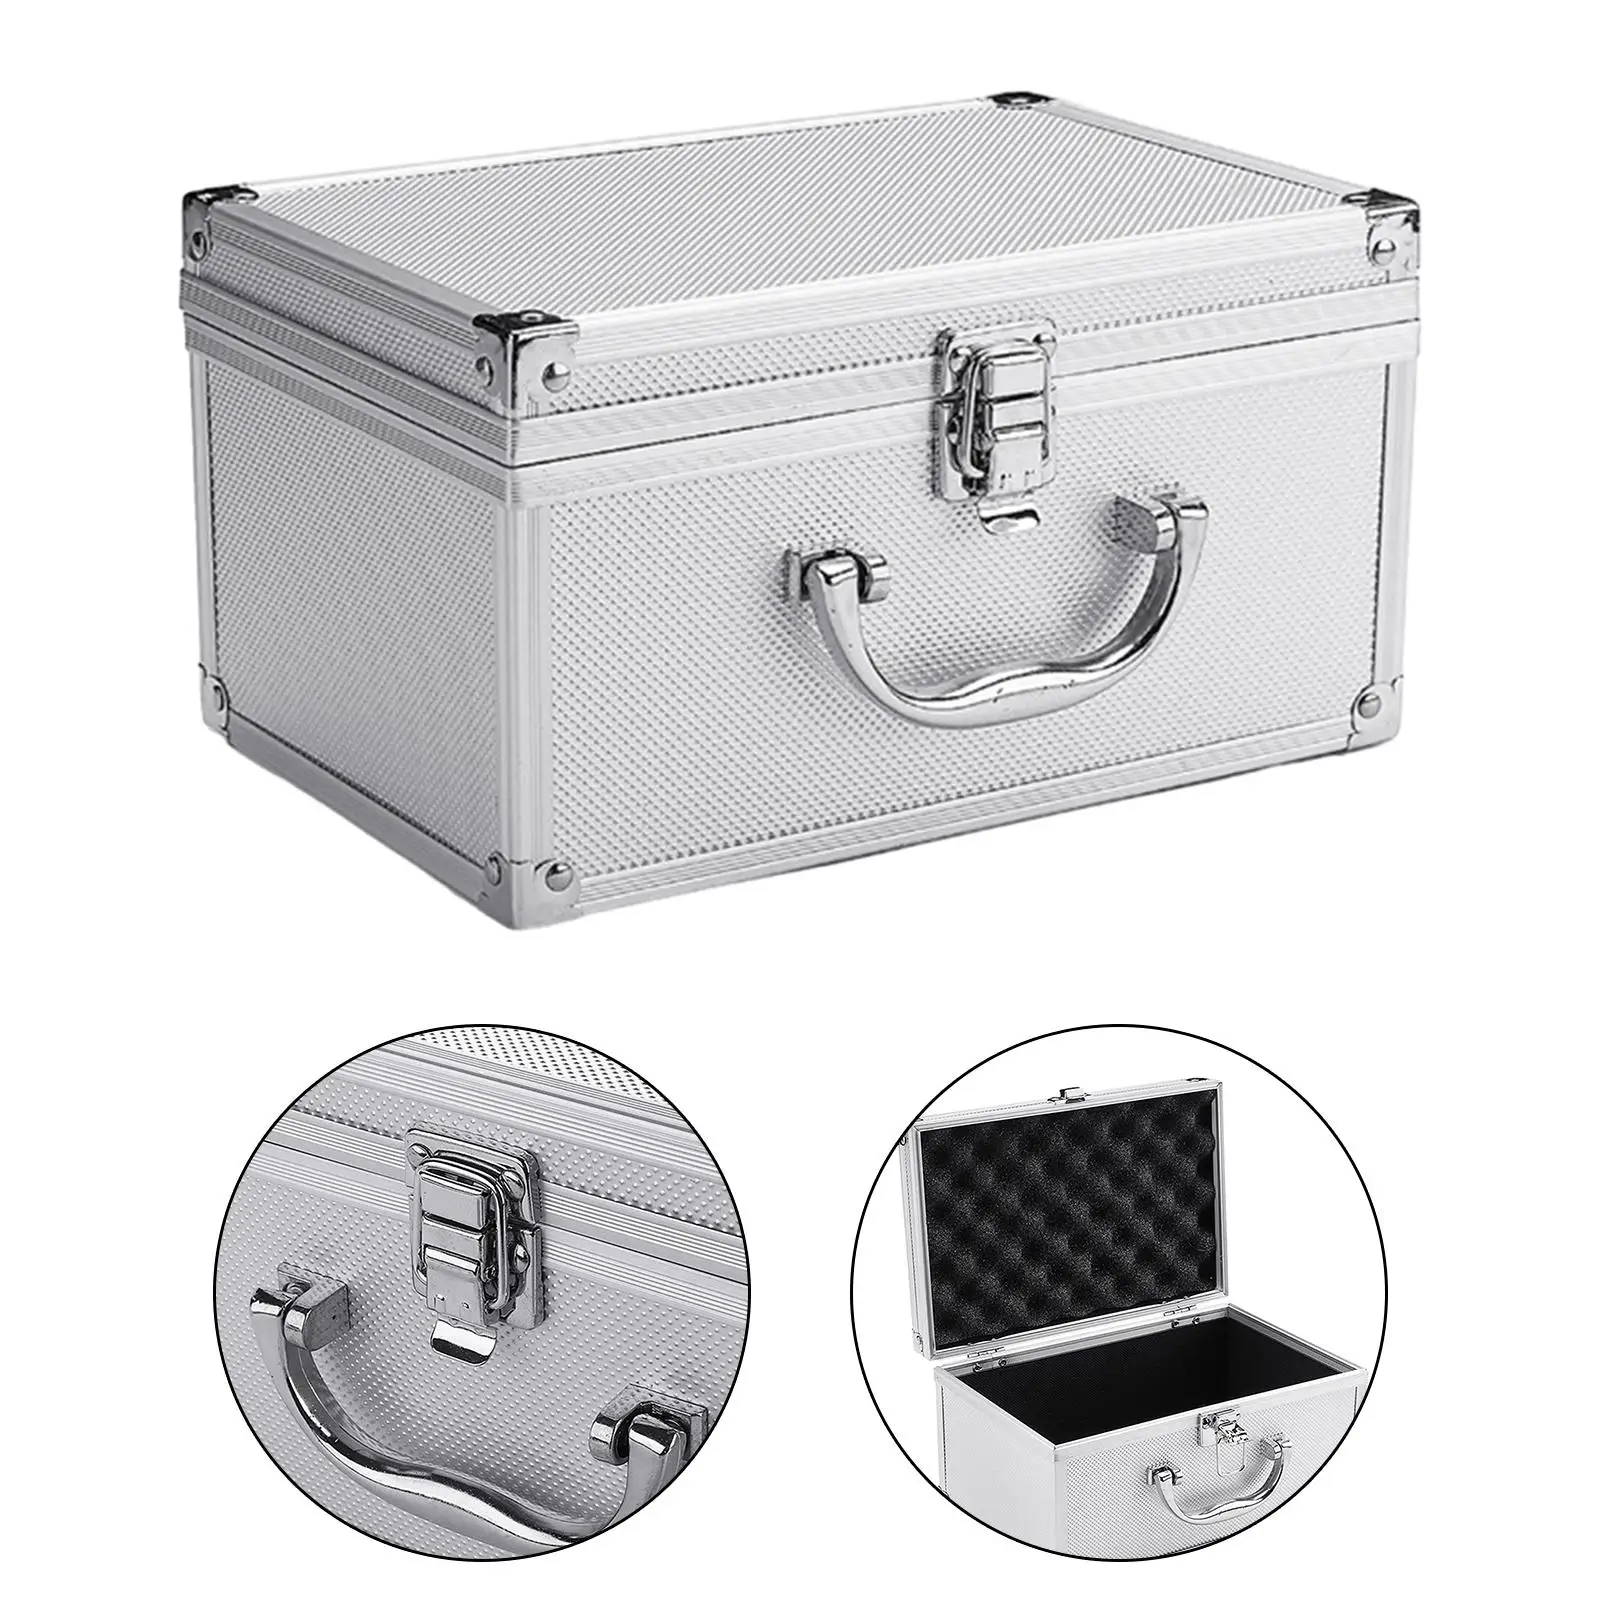 Toolbox Storage Box Drill Impact Drill Drivers Storage Aluminum Alloy Repair Tool Storage Case Large Space for Trunk Home